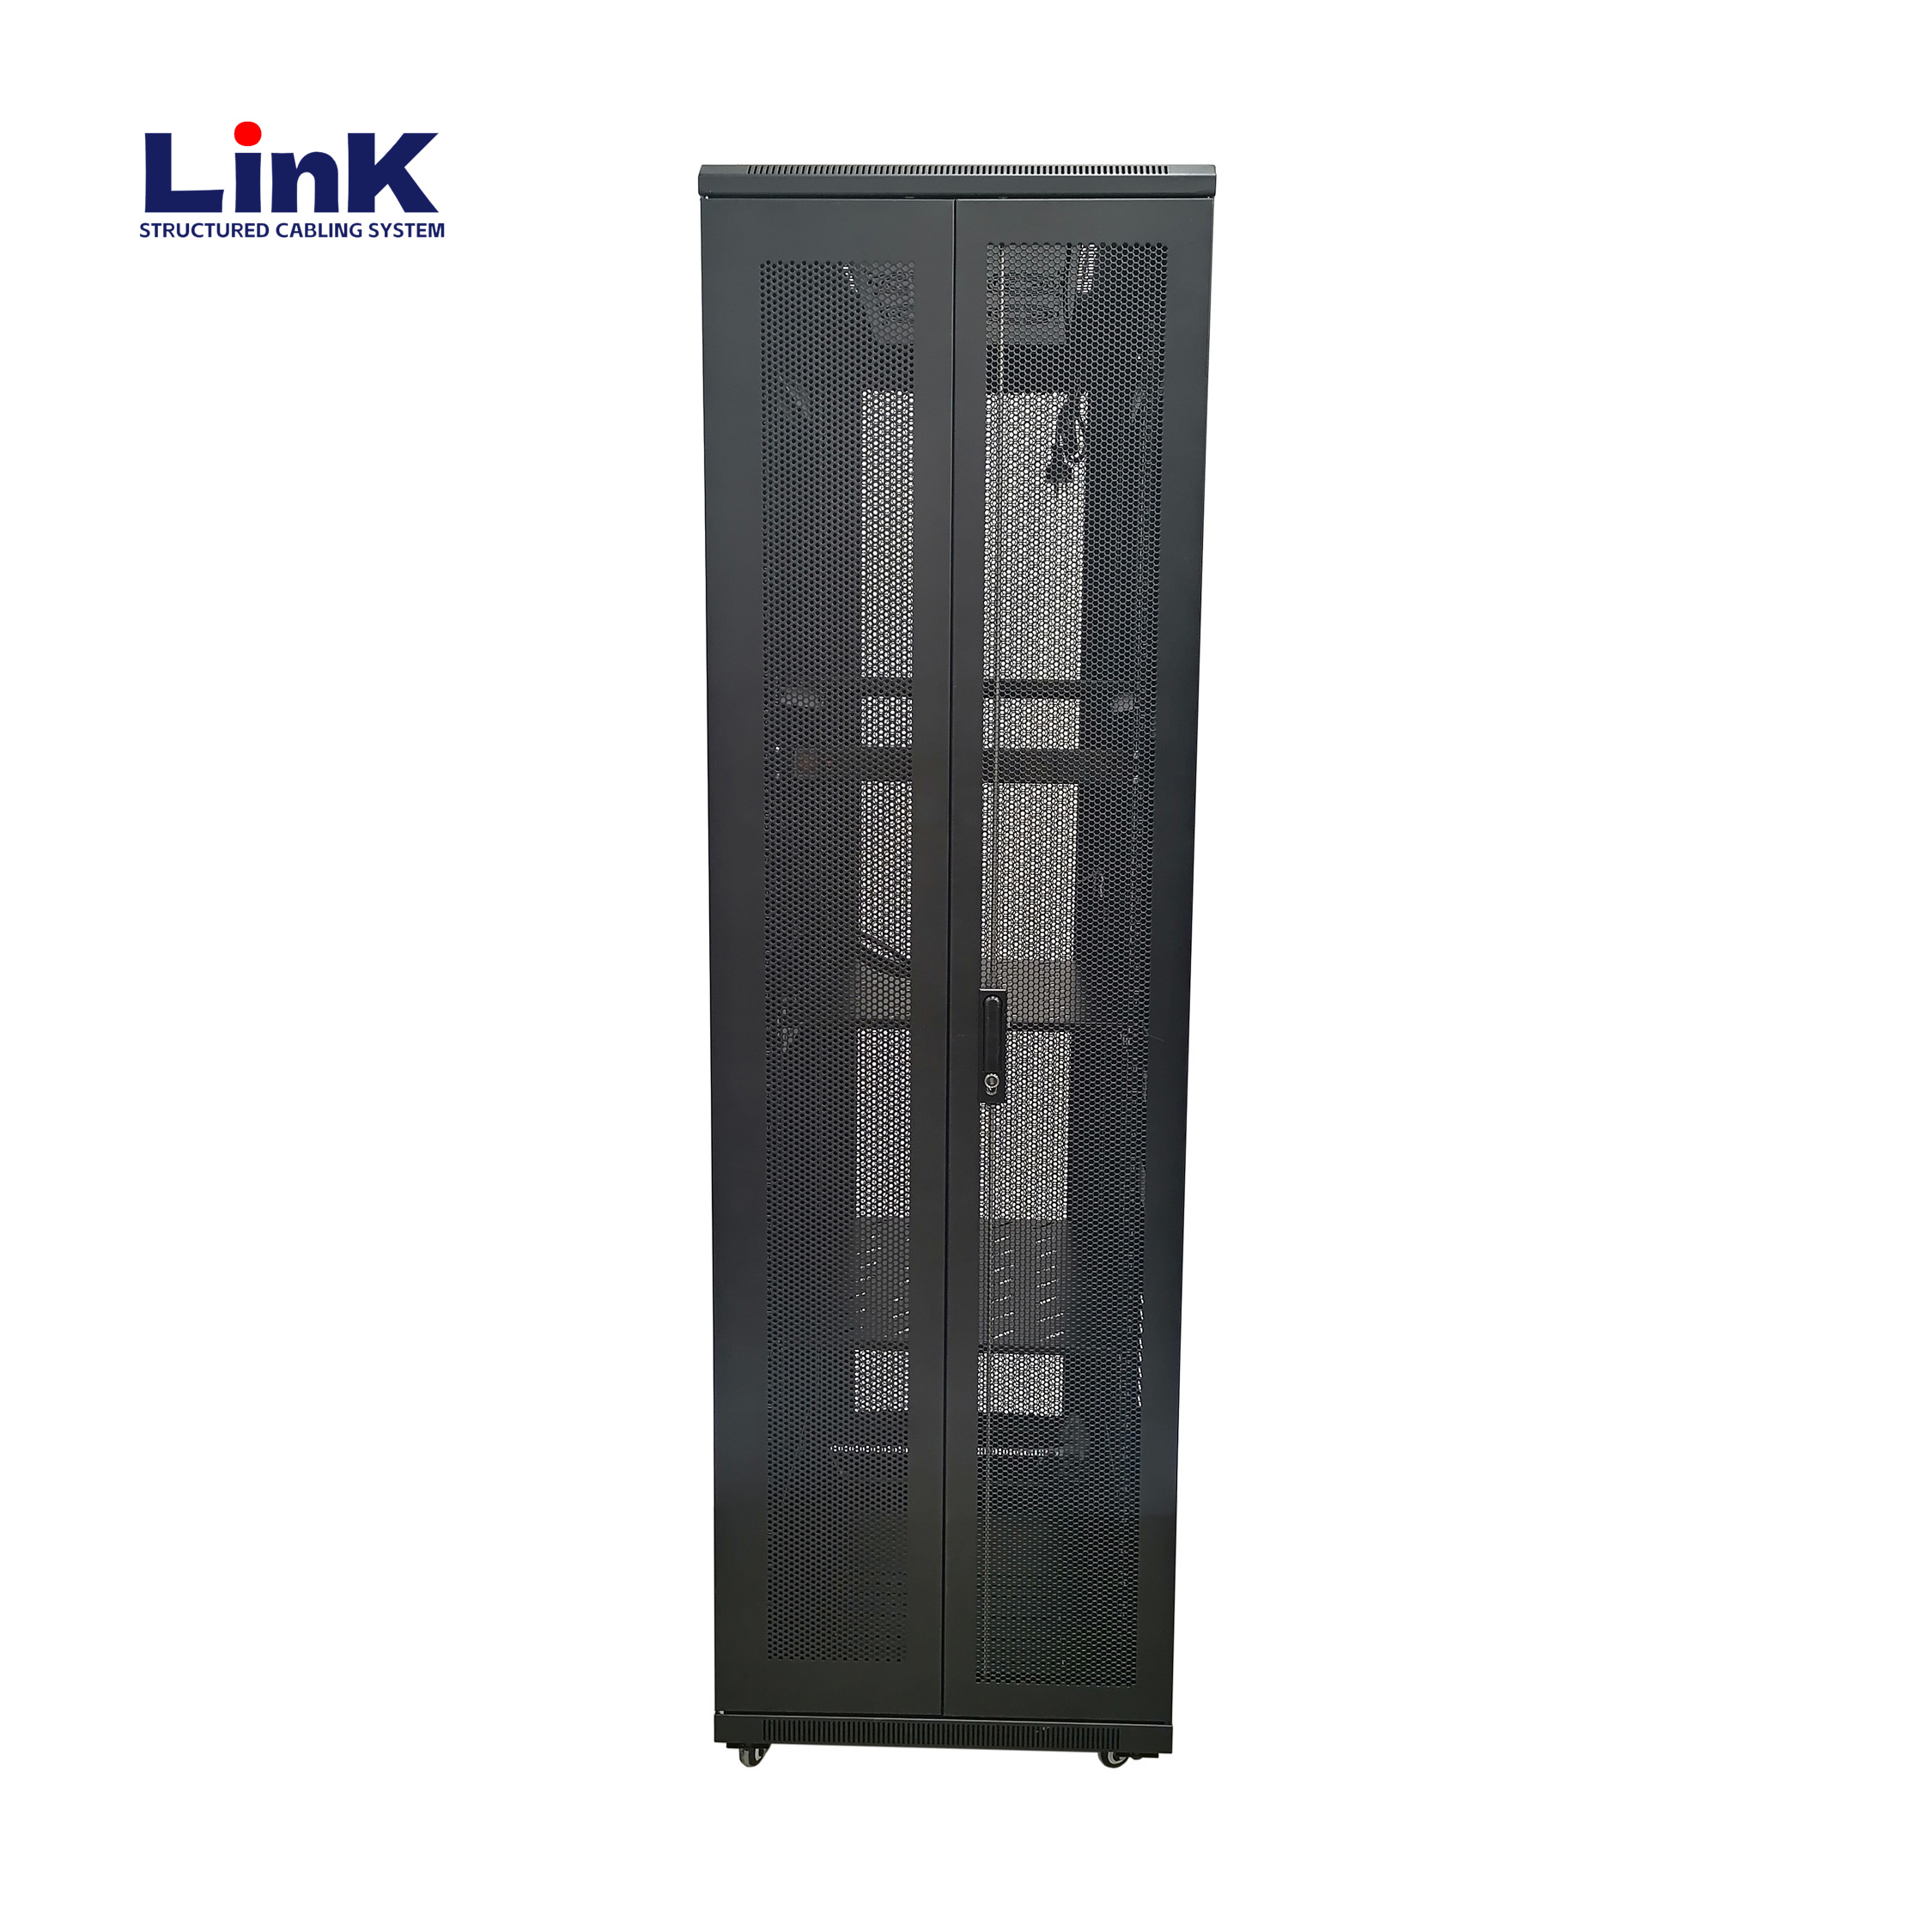 42u High Quality Server Rack Cabinet It Data Center Server Cabinet with casters